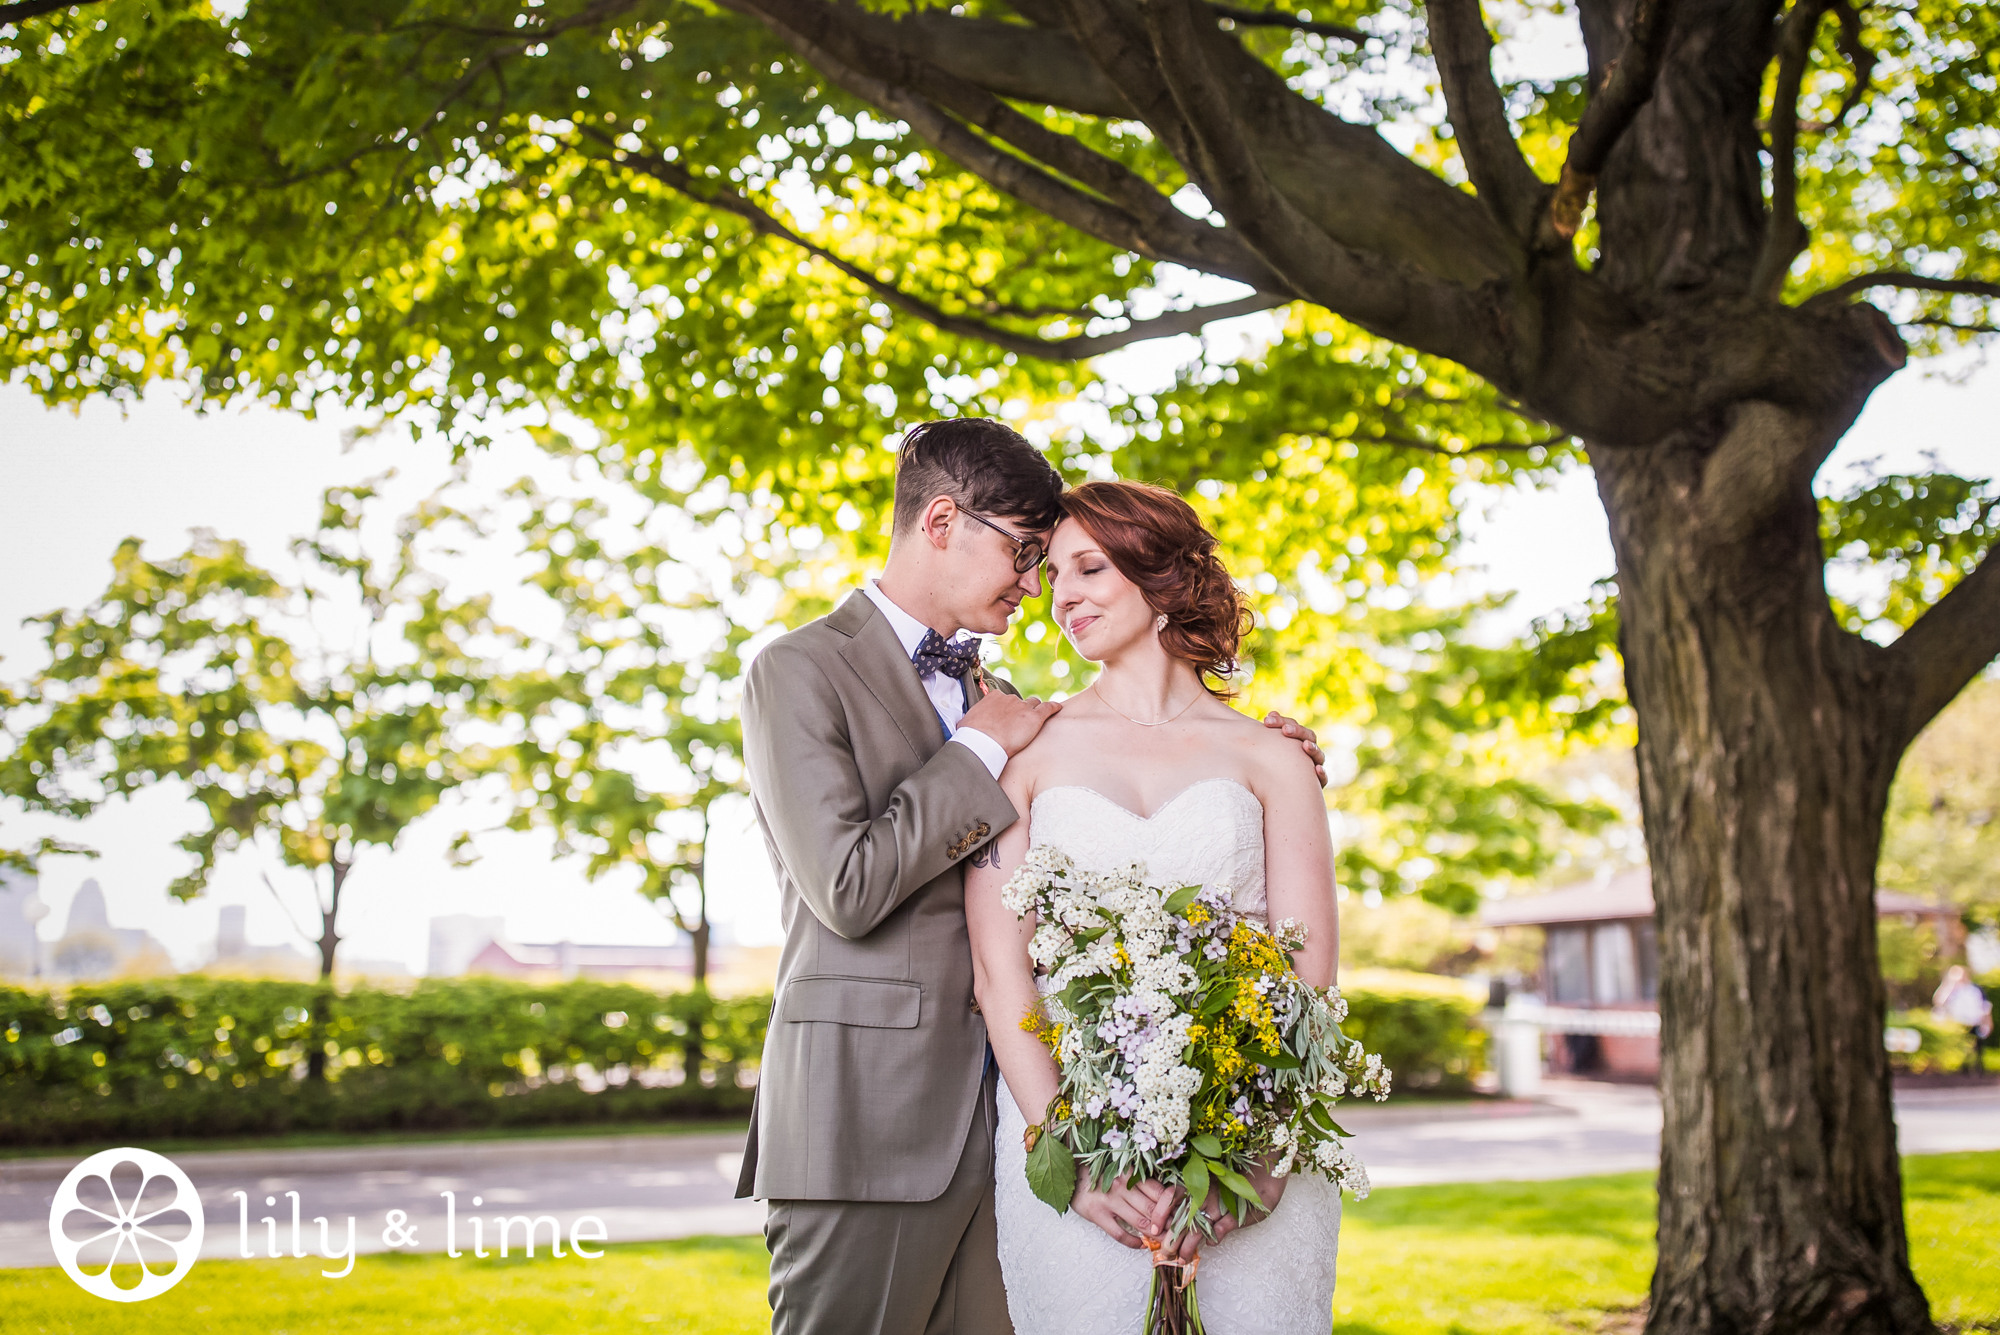 lily & lime wedding photography favorite instagram wedding inspiration